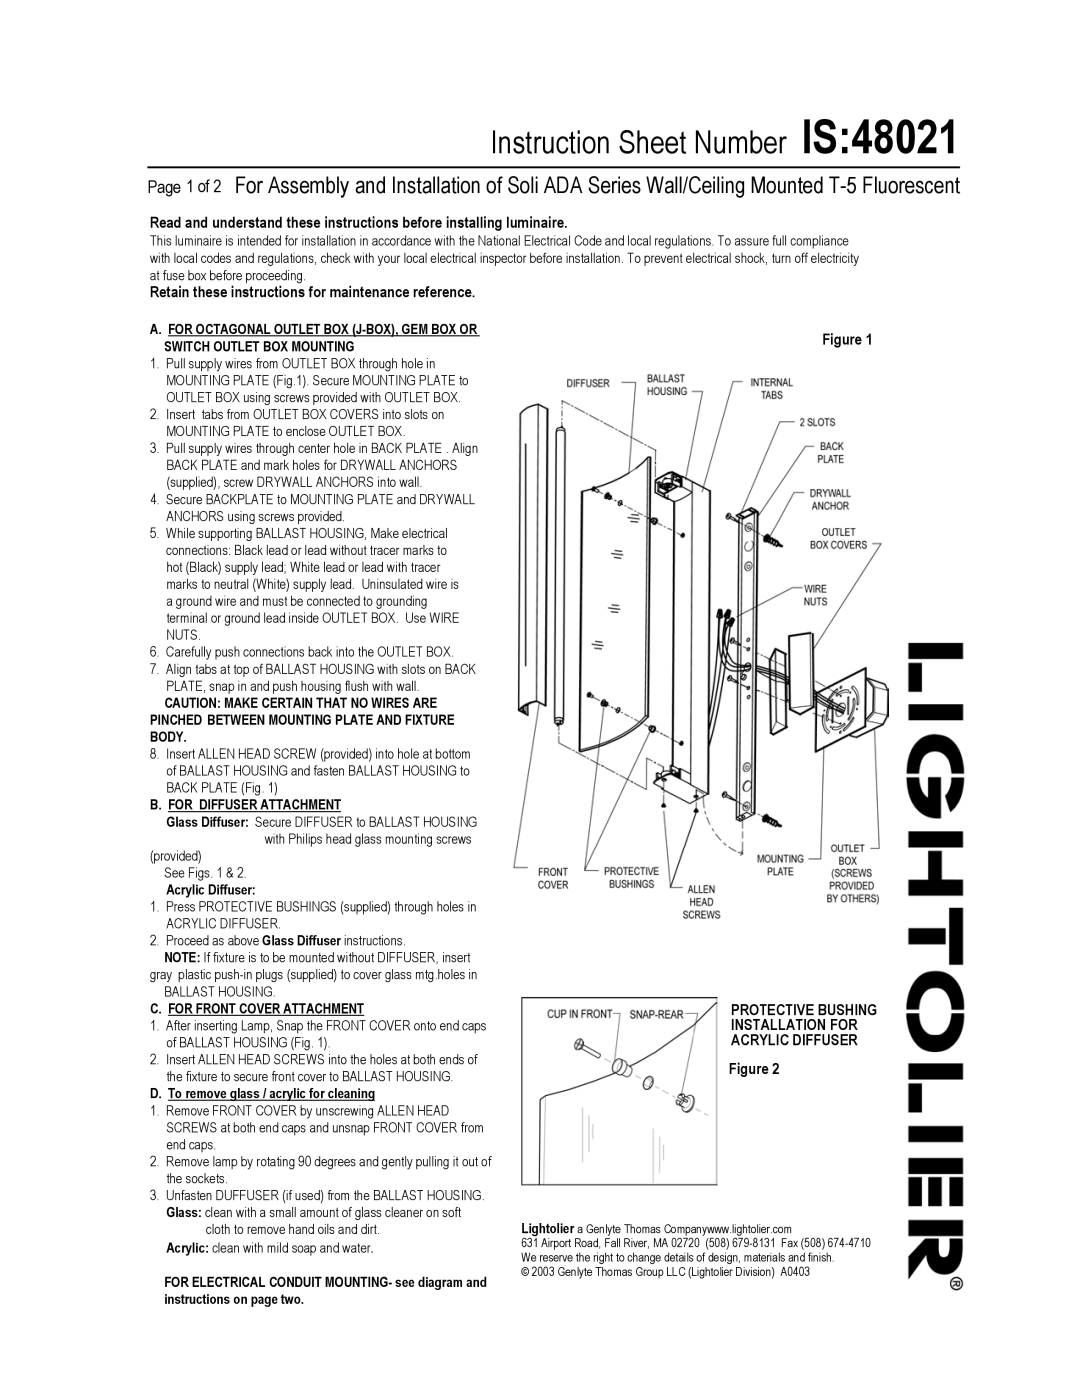 Lightolier IS:48021 instruction sheet Instruction Sheet Number IS, Figure PROTECTIVE BUSHING INSTALLATION FOR 